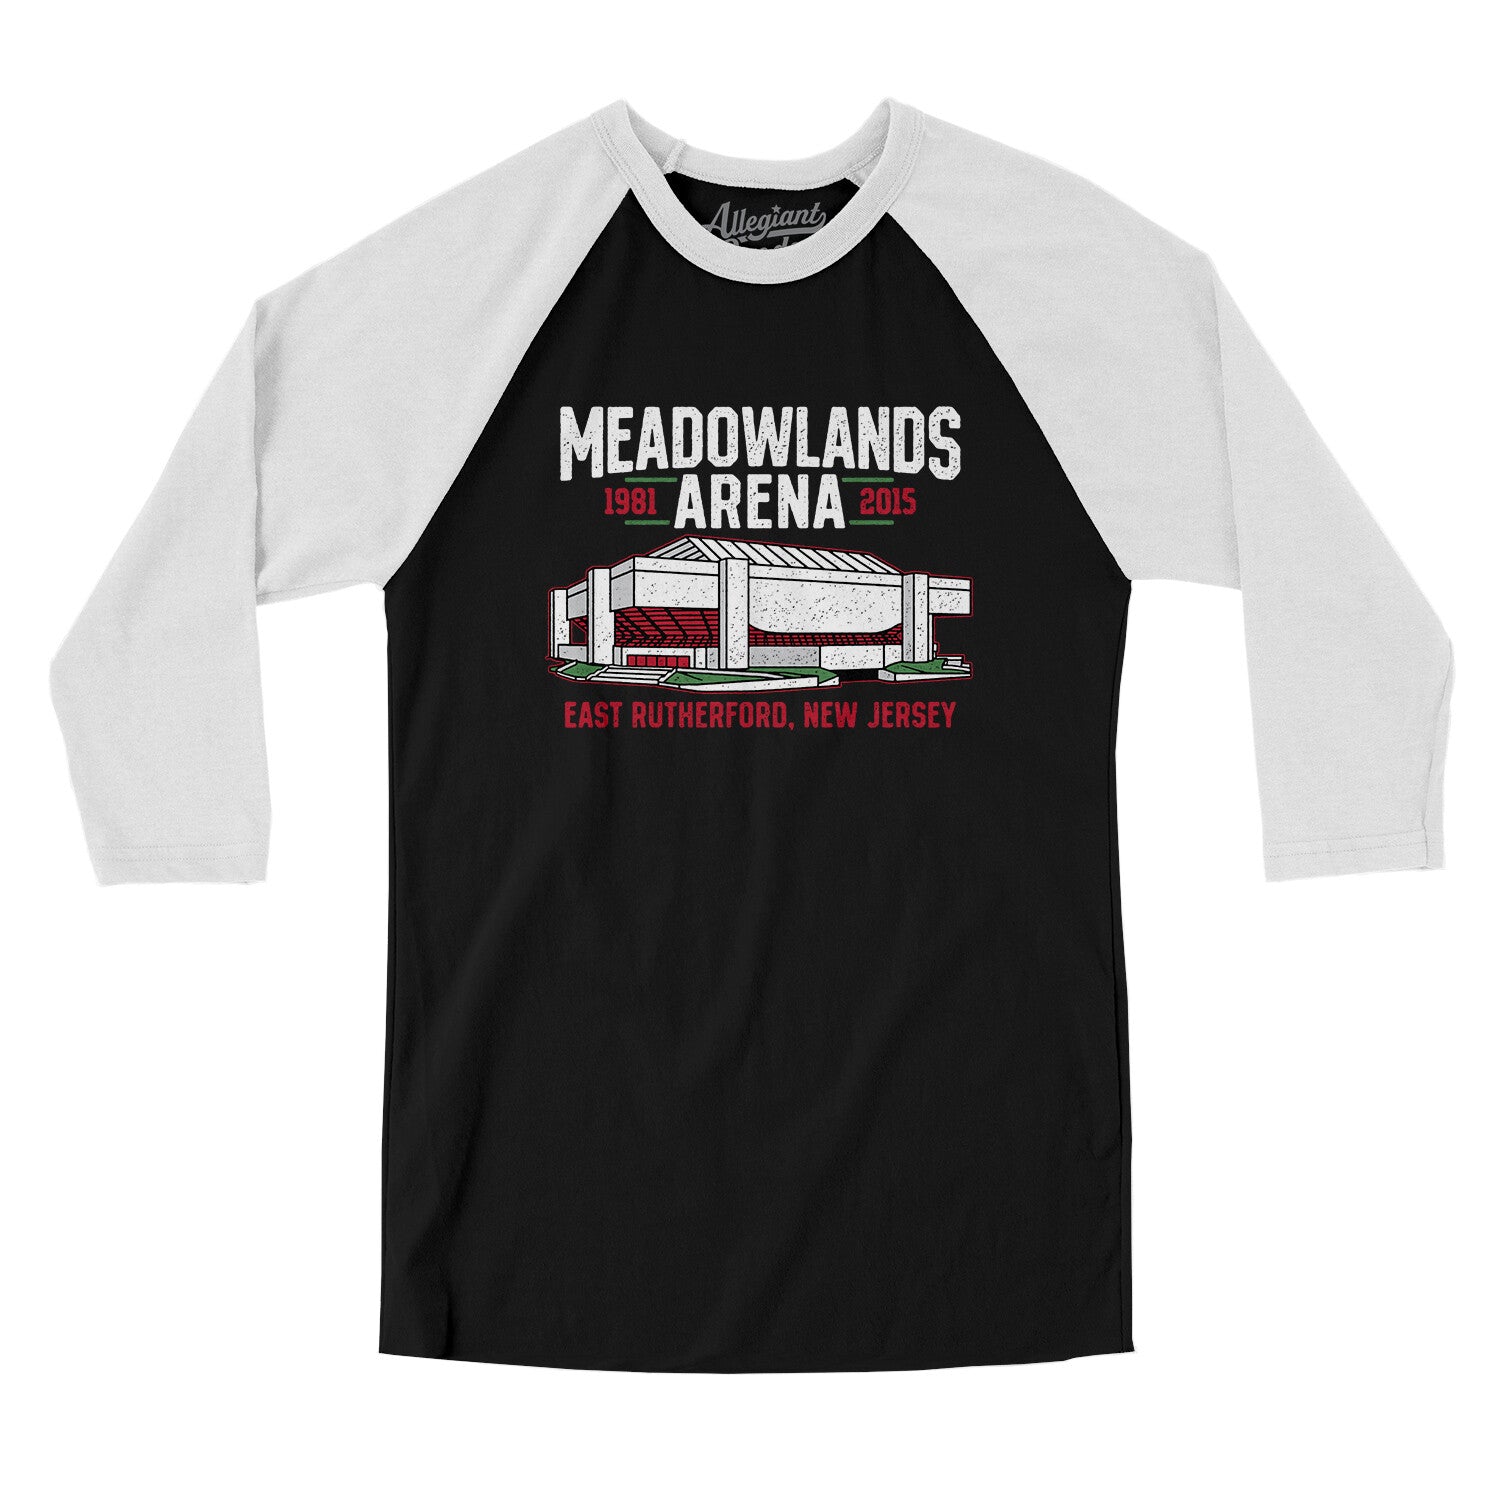 Meadowlands Arena - East Rutherford 